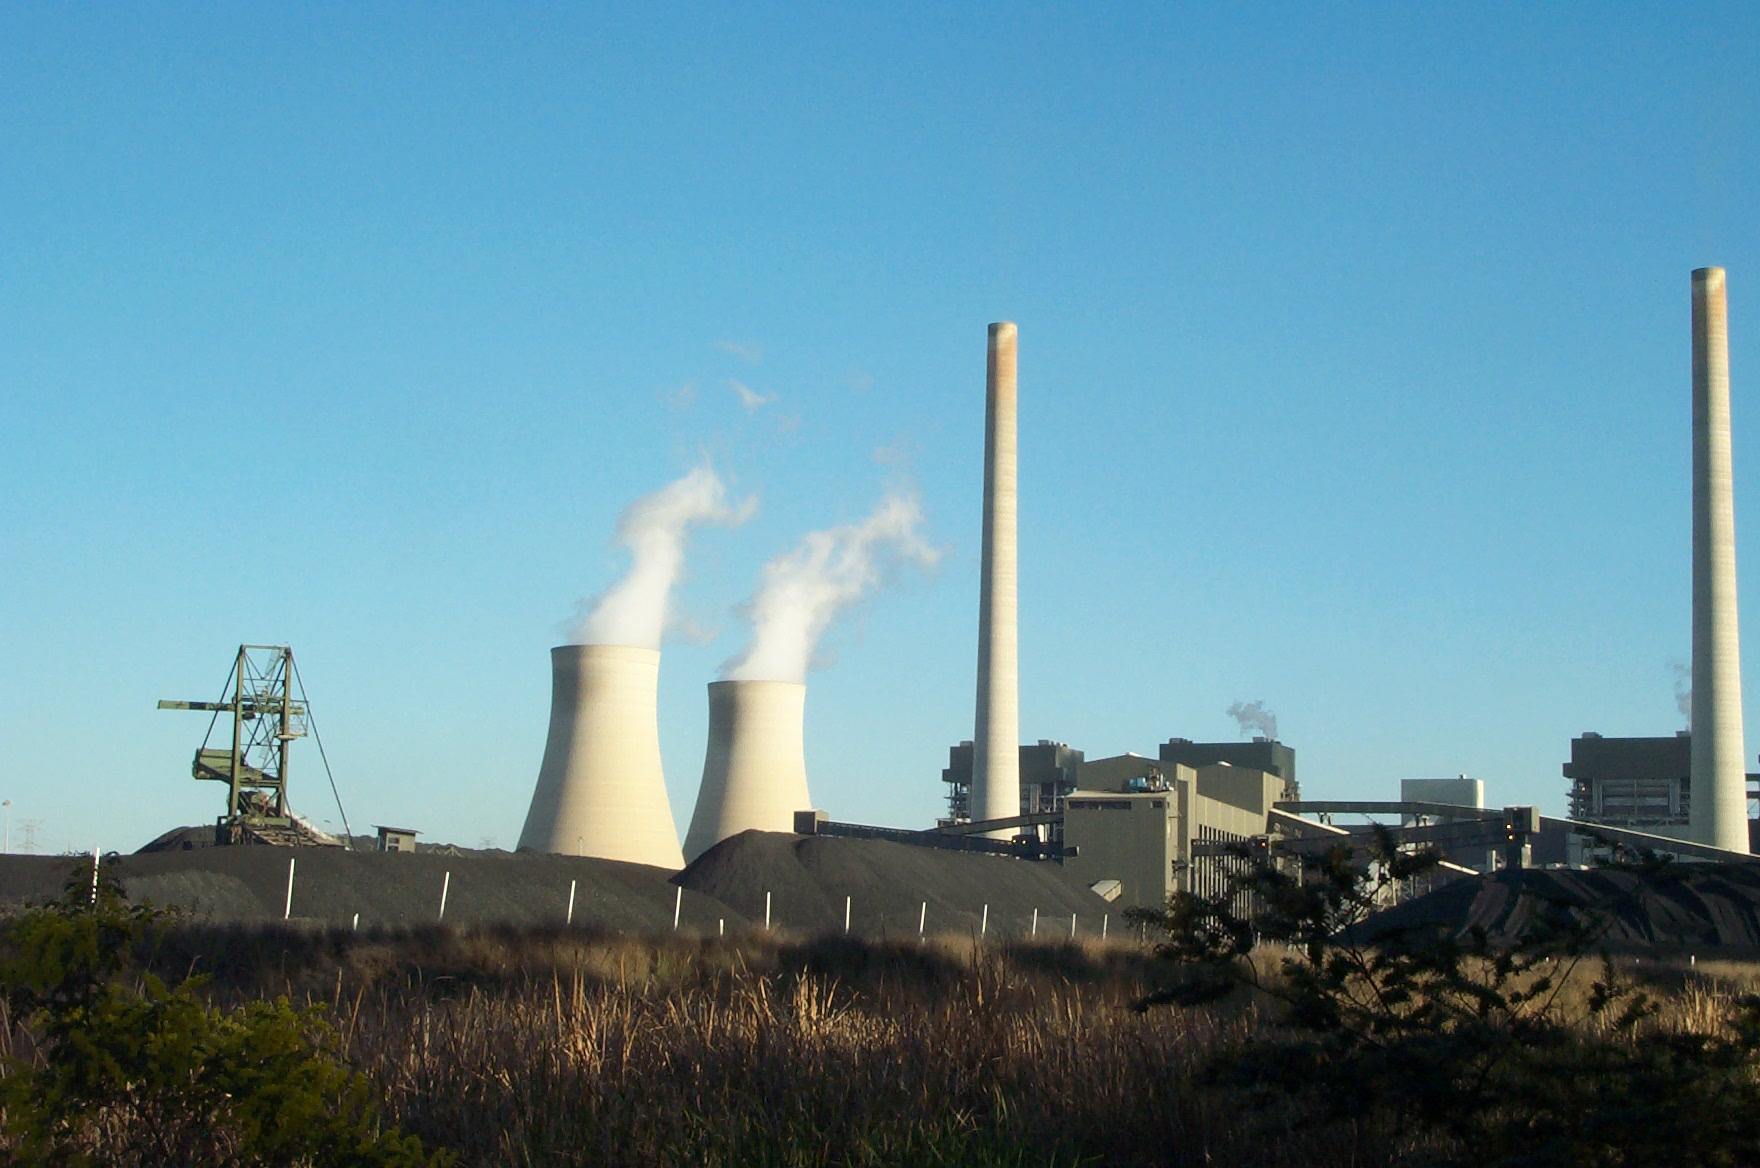 File:Bayswater Power Station with coal.jpg - Wikipedia